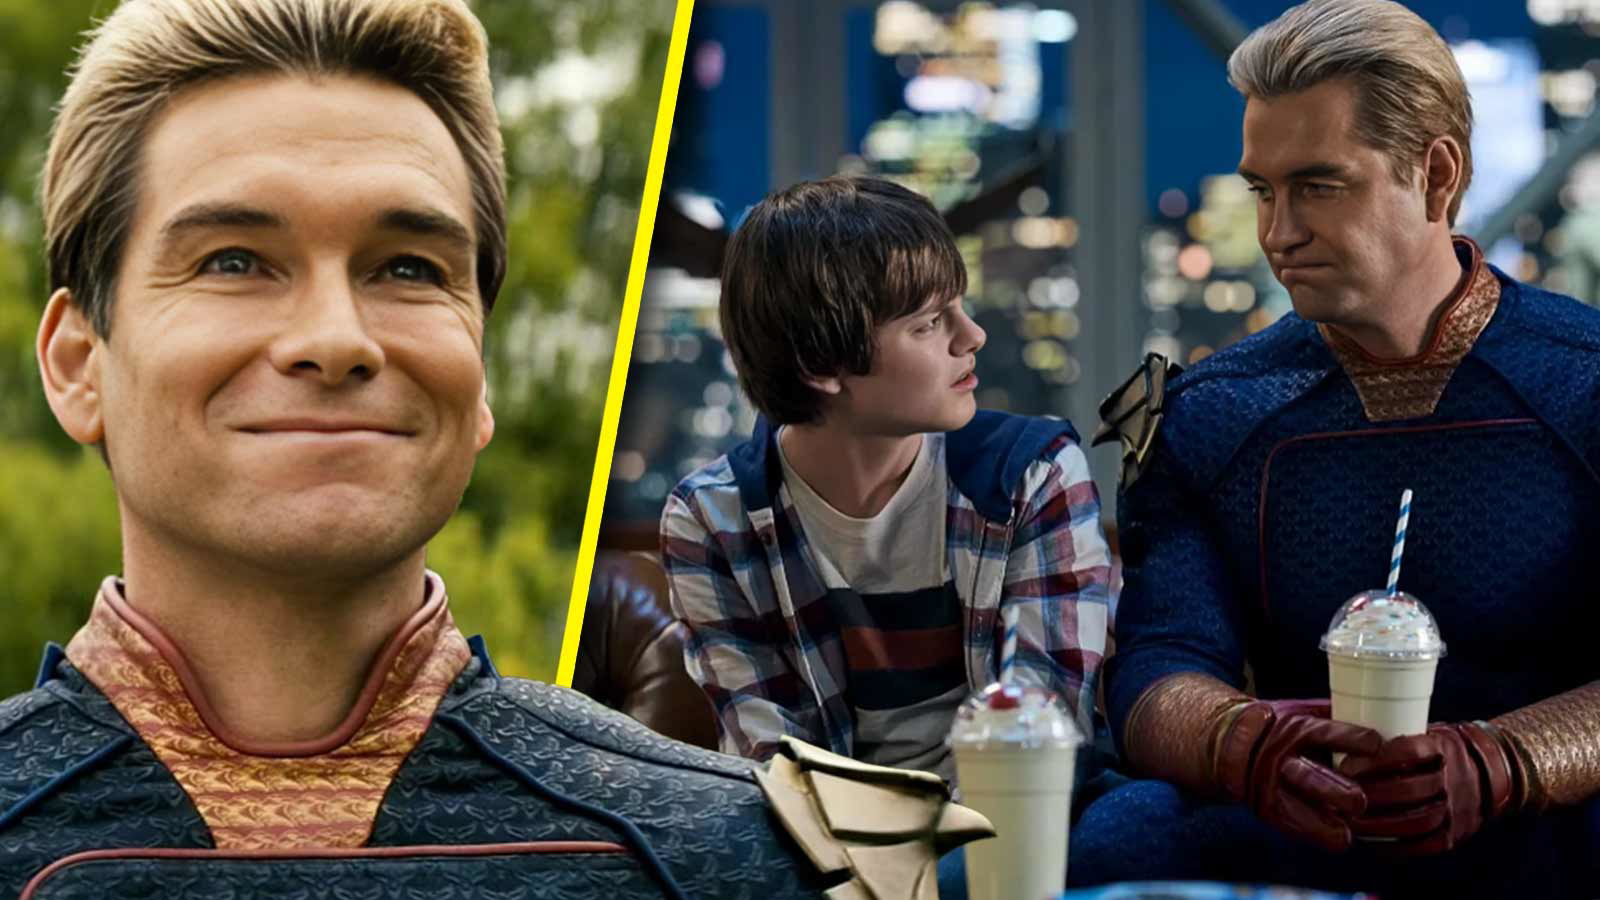 “I can’t trust him”: Antony Starr is Homelander in Real Life and Fans Can’t Stop Noticing The Proofs For It